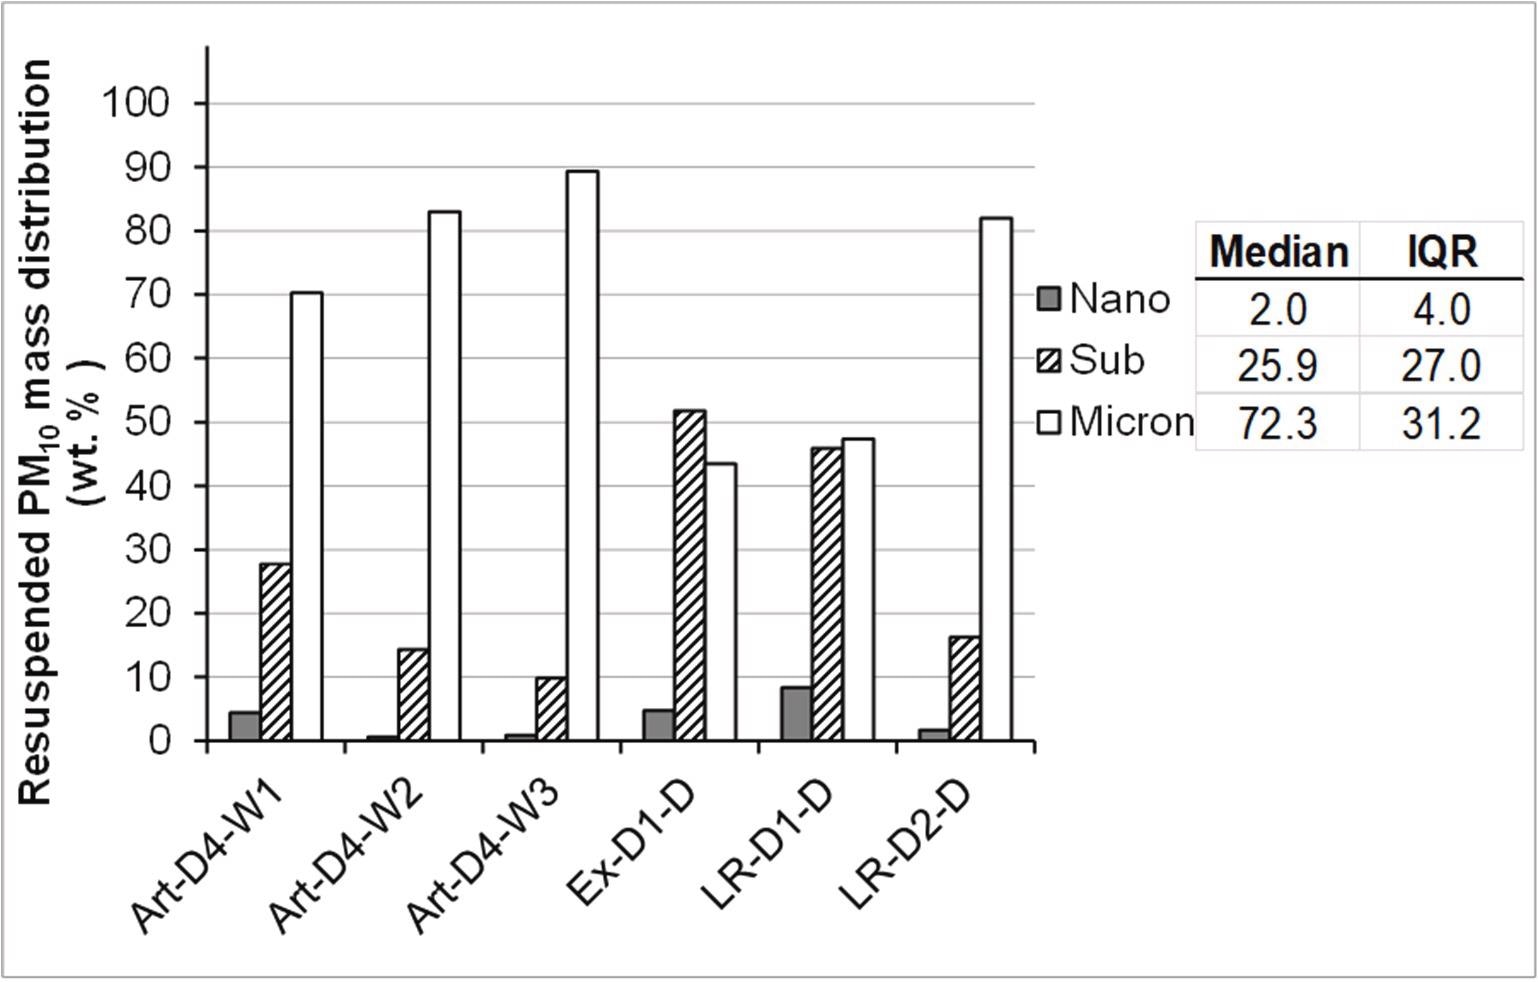 Distribution of the mass collected among the nano, sub-micron and micron classes of filters for each resuspended dust box sample, expressed as median % of the total resuspended PM10 (total mass recovered on filters < 10 µm > 10 mm); inset overall median % of the total resuspended PM10 for all 6 samples, and inter quantile range (IQR).